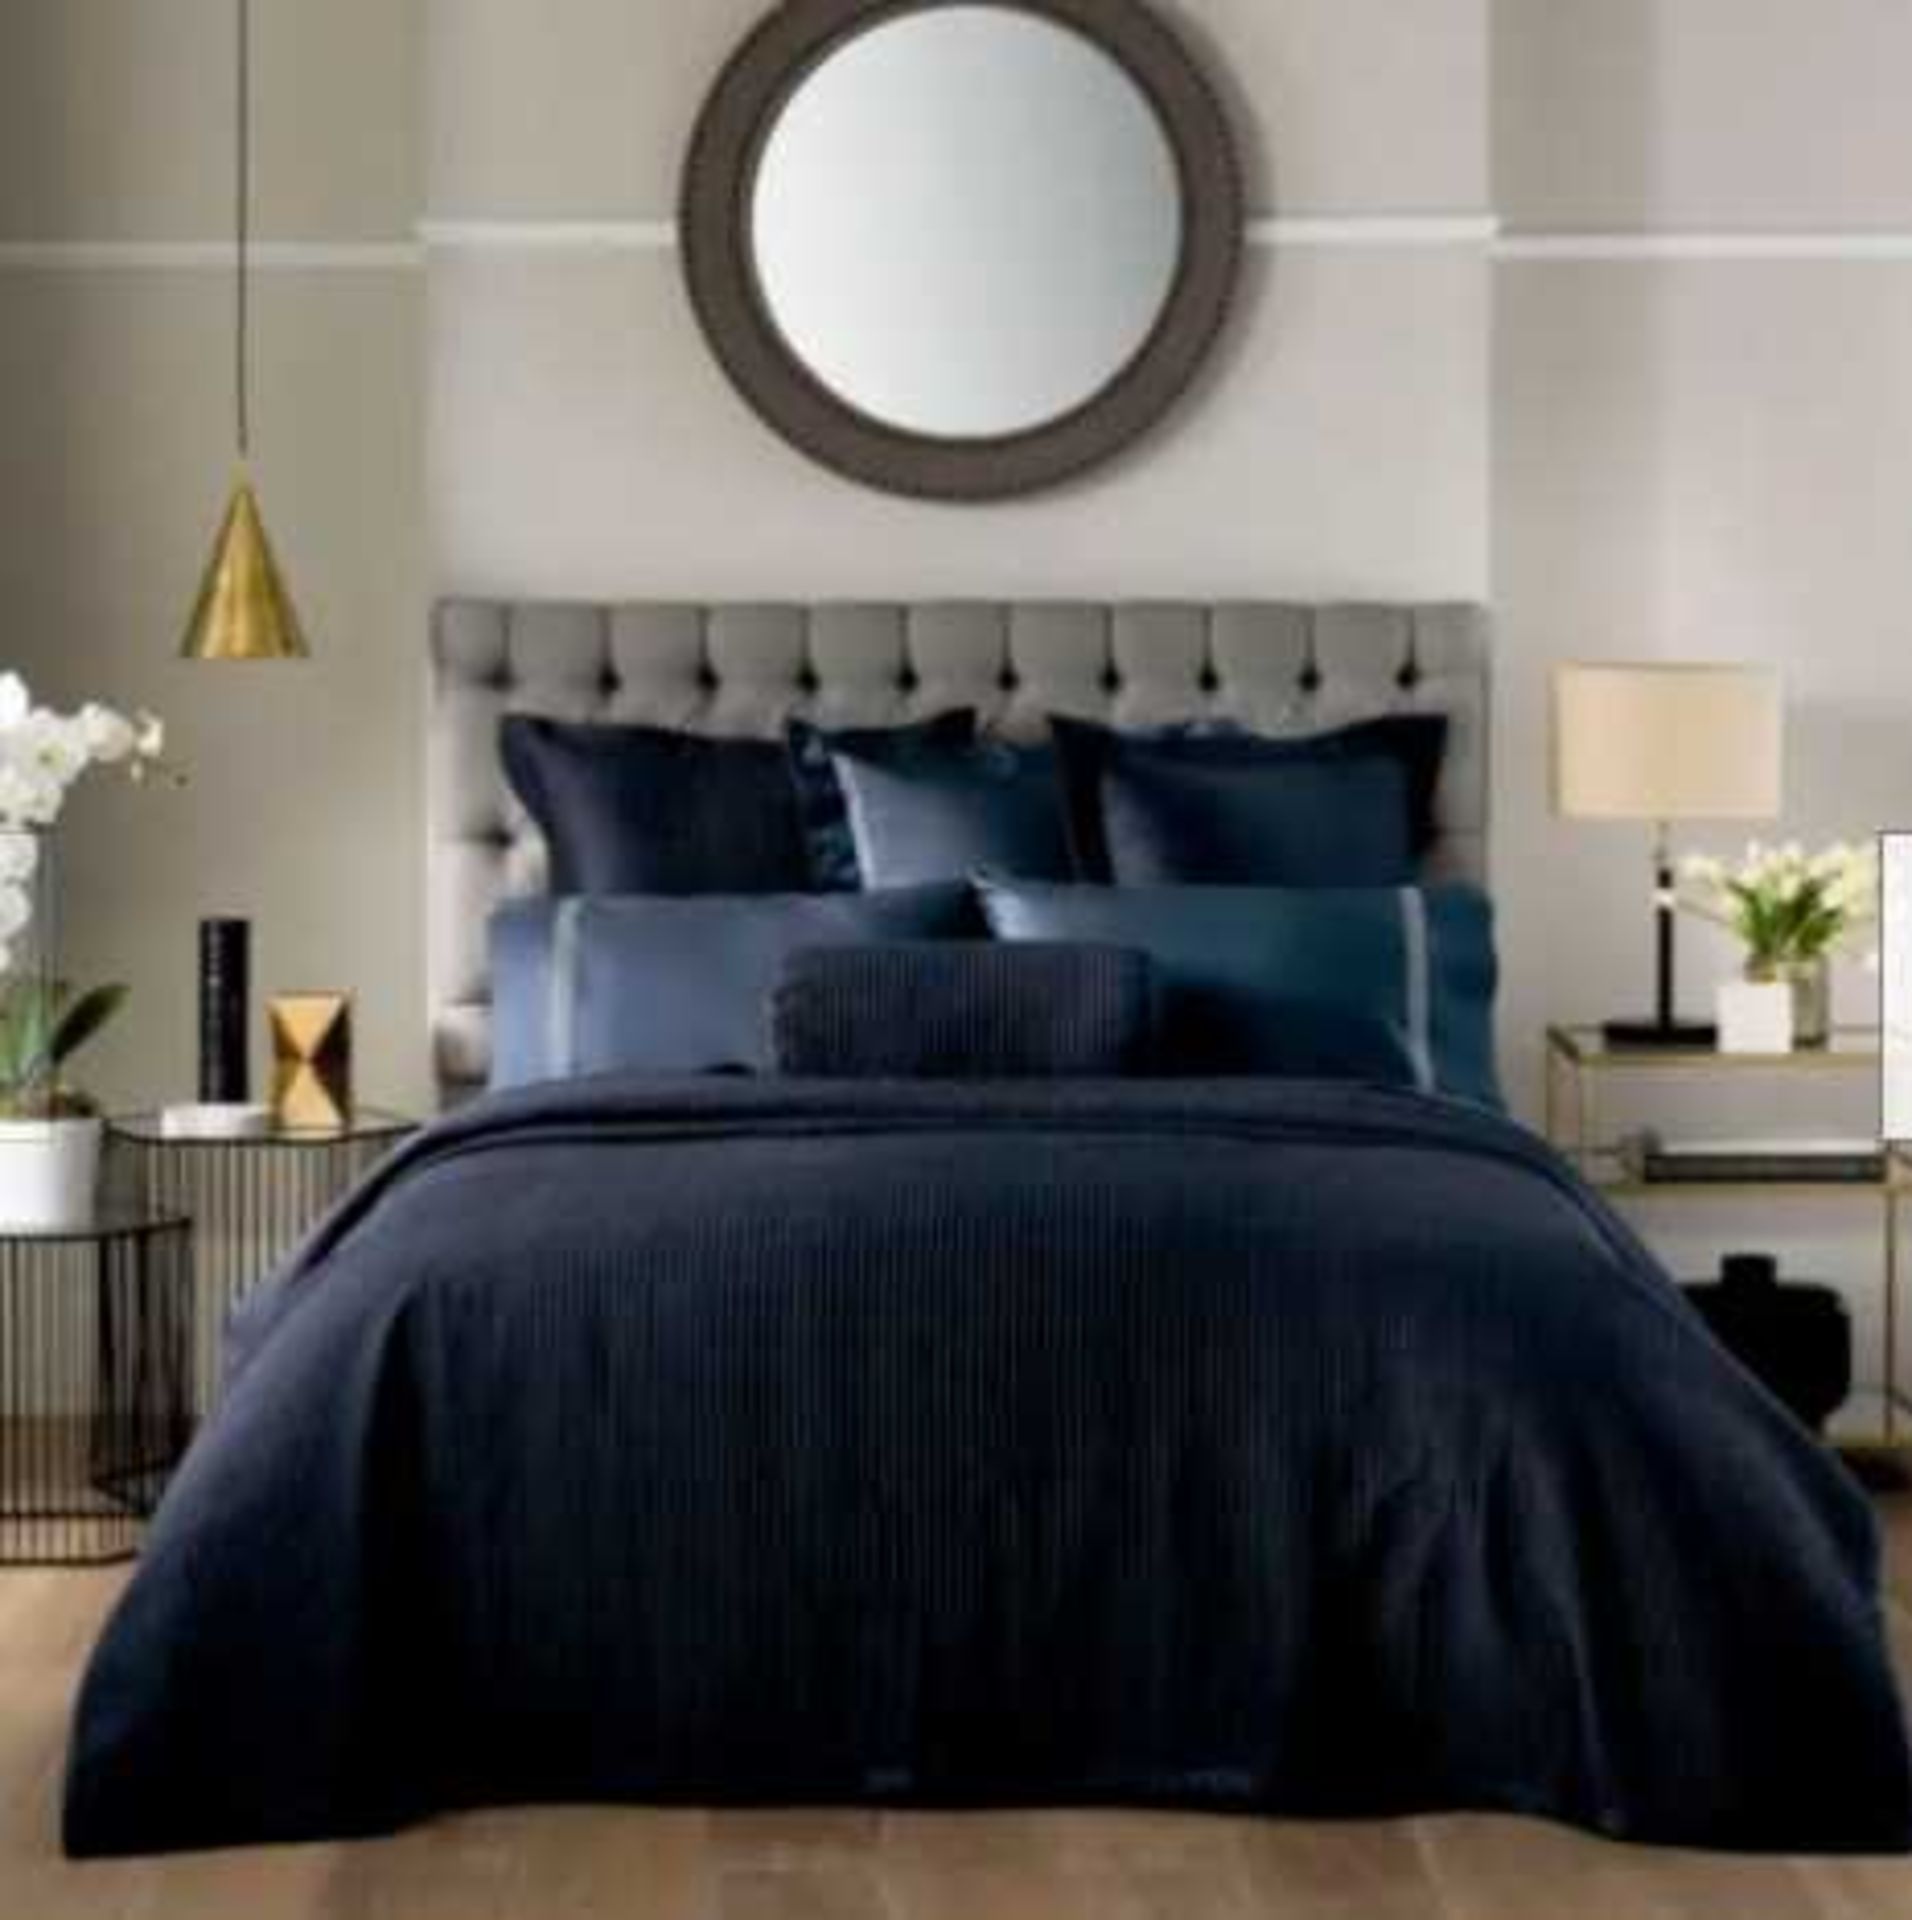 Sheridan - Midnight Bed Skirt - New & Packaged. RRP ?75 Each.